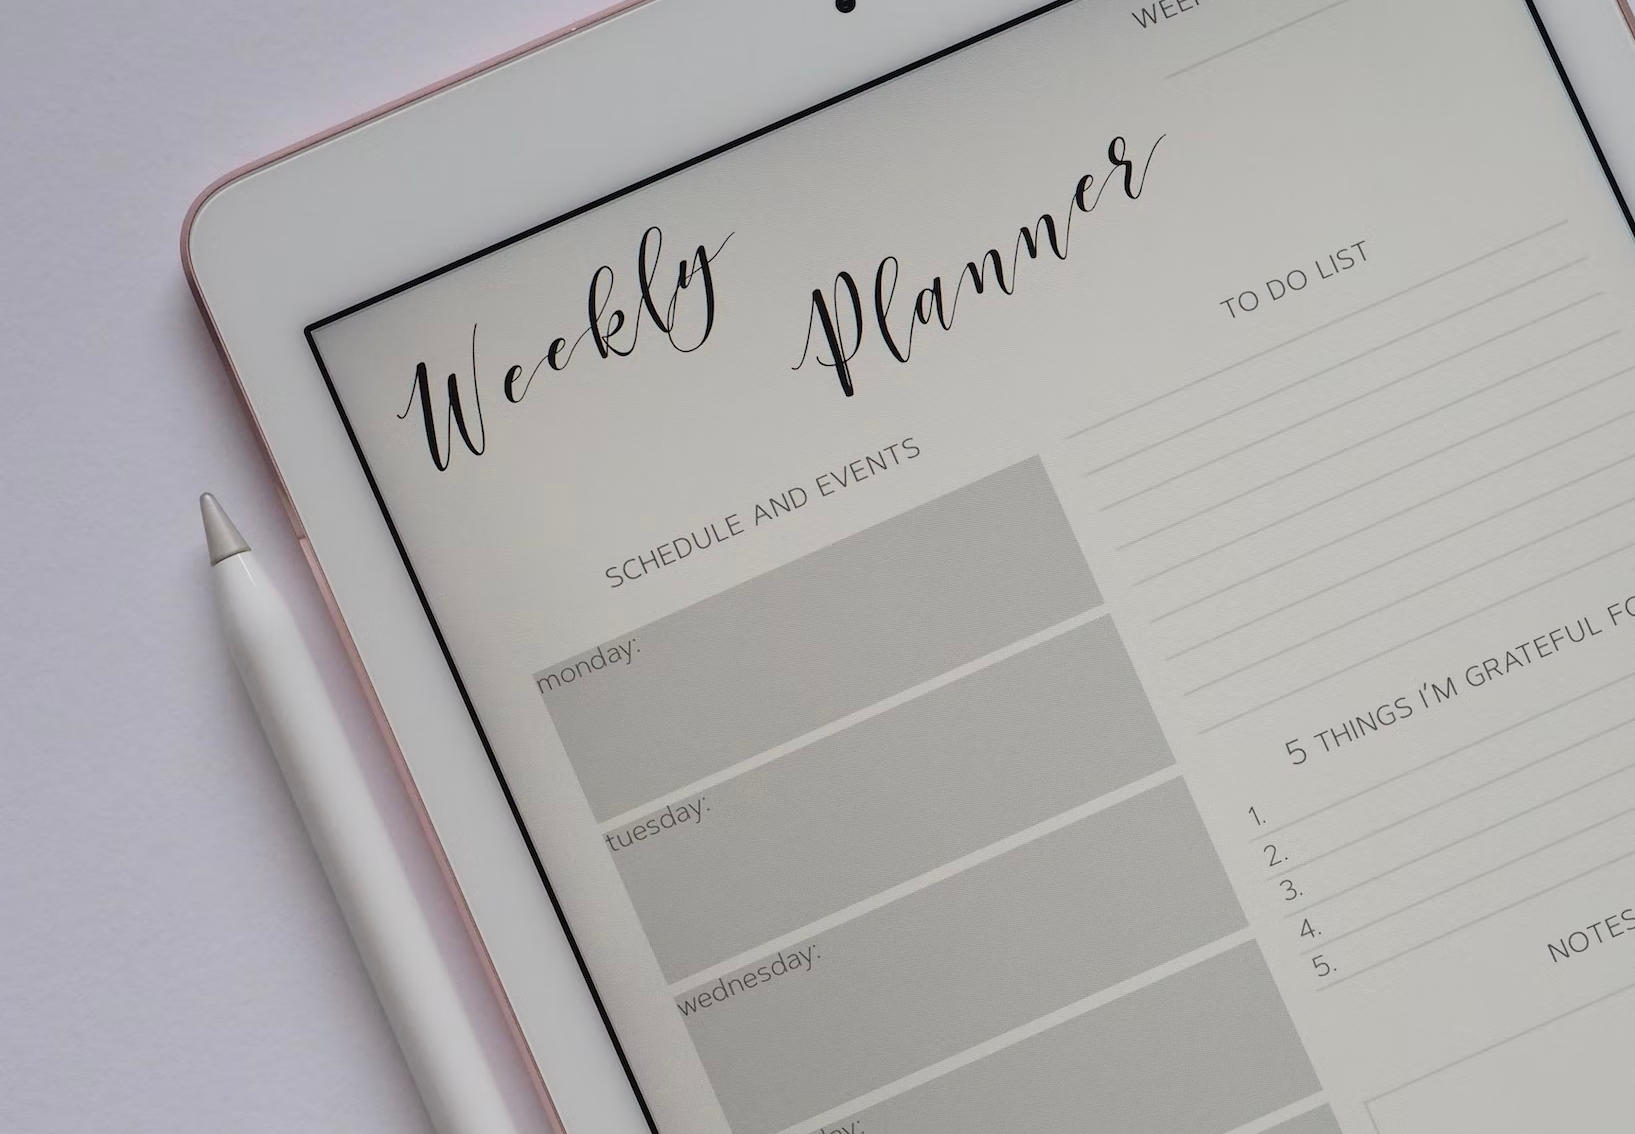 A weekly planner, photo by Jess Bailey via Unsplash.